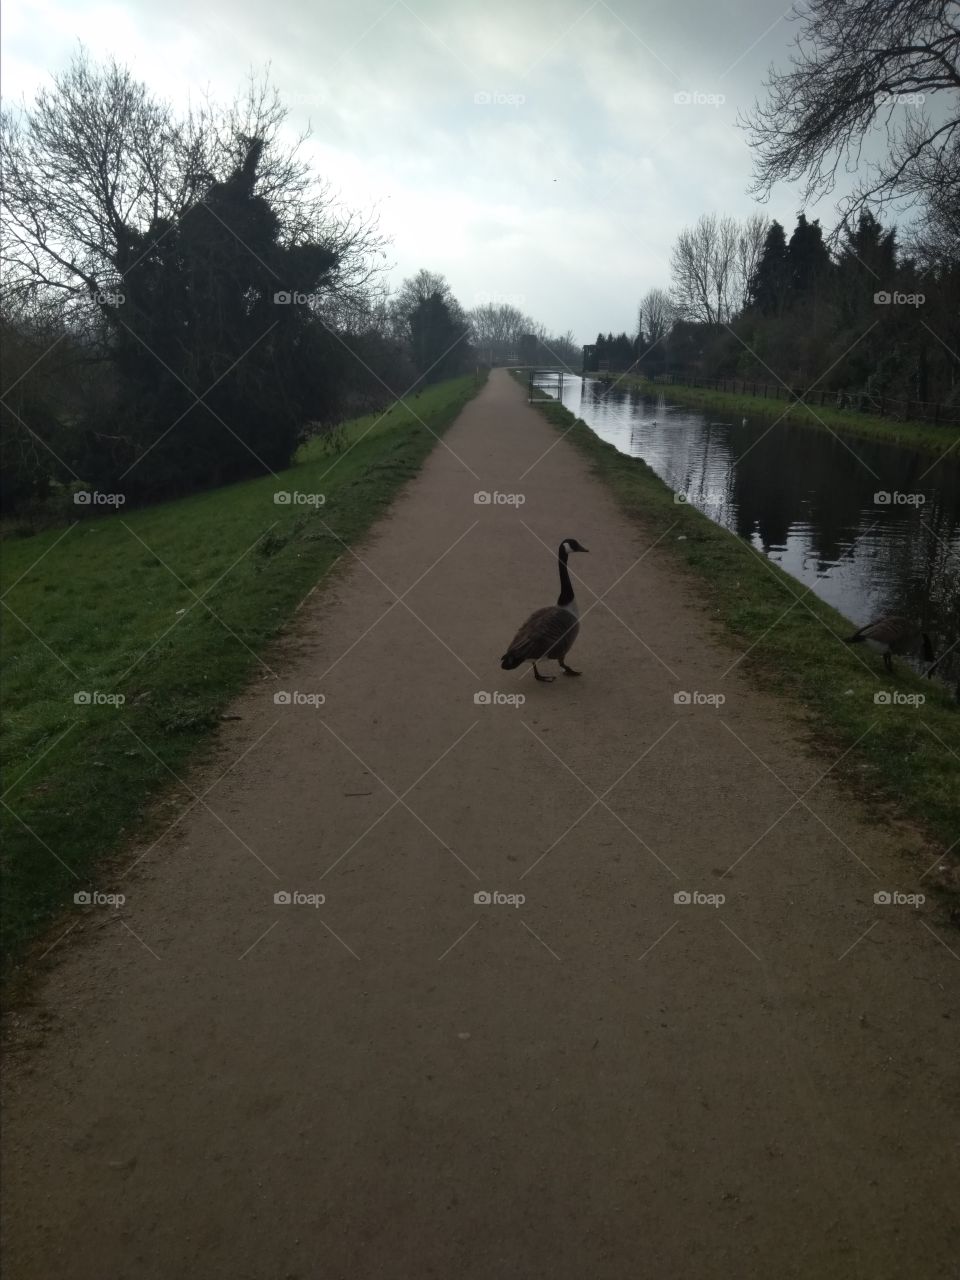 Canadian Goose Crossing at the New River, Broxbourne